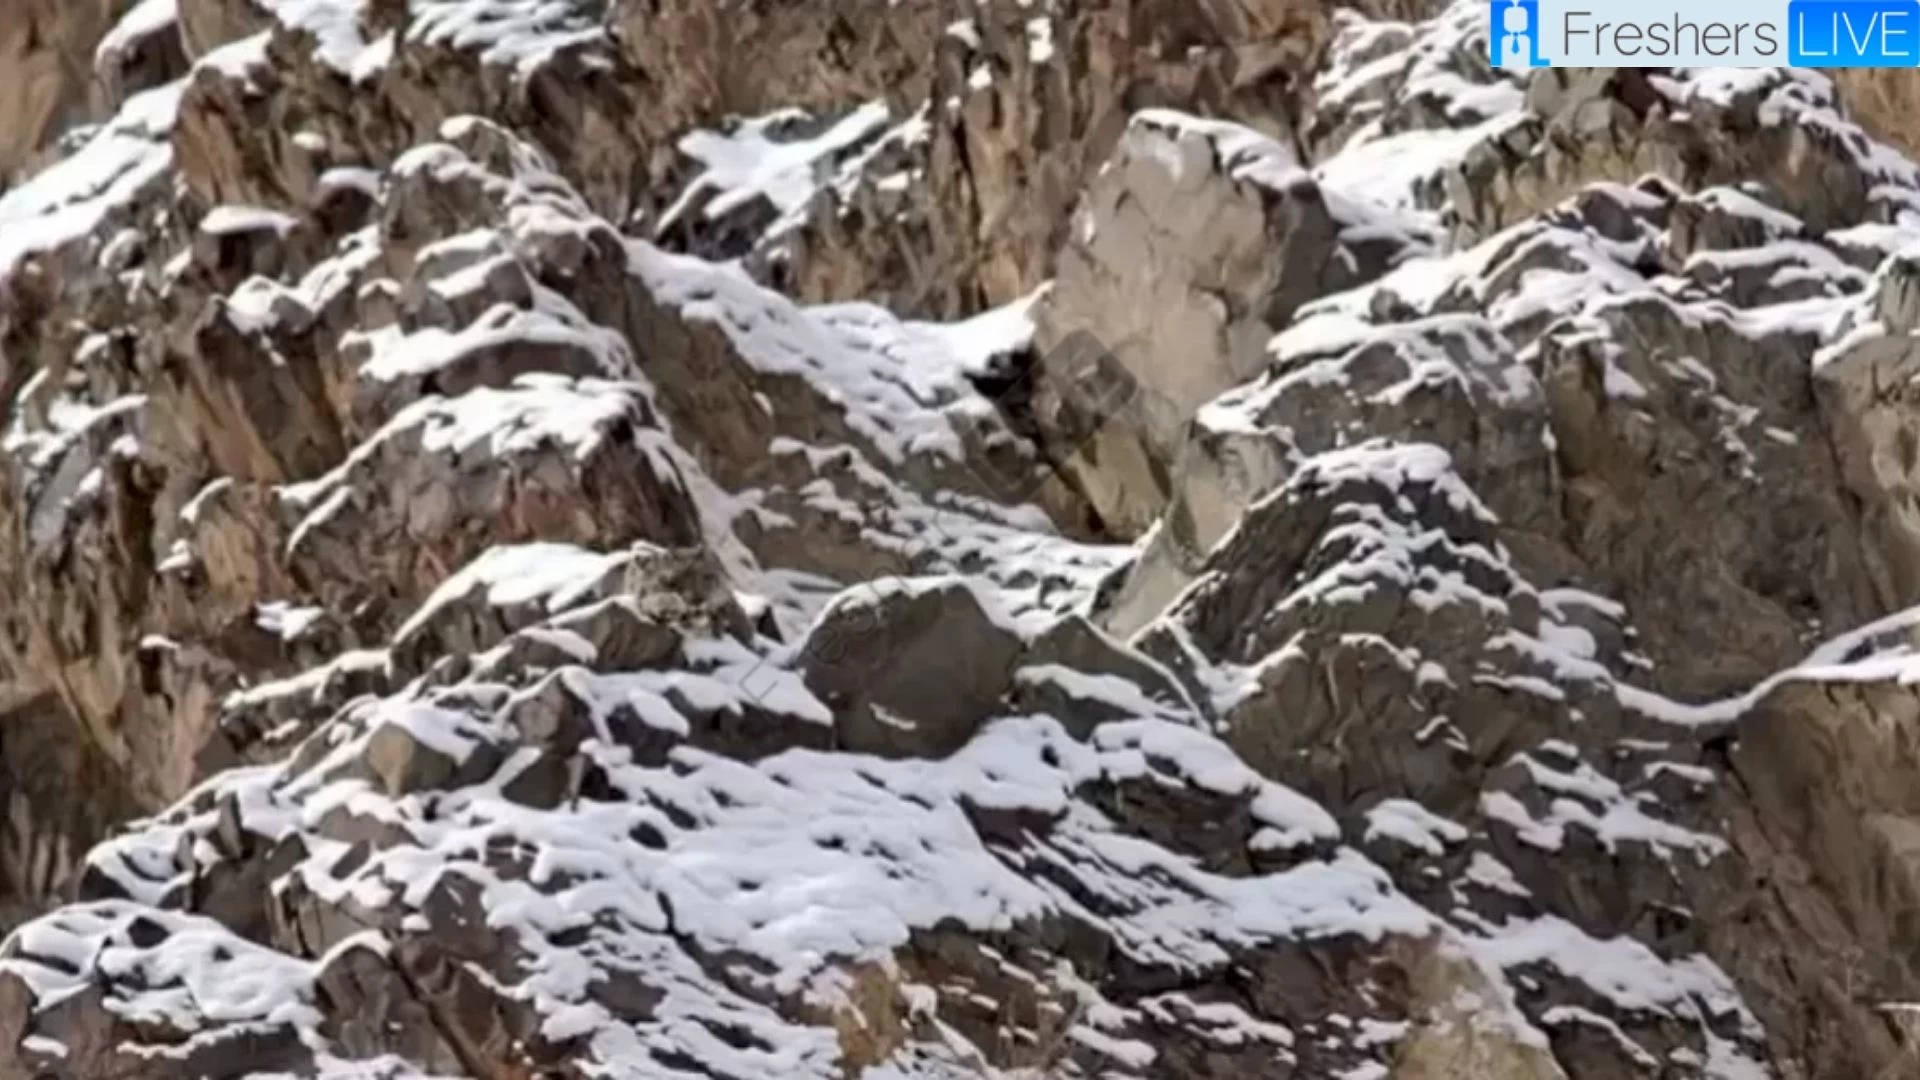 You are a special talent if you can find The Perfectly Camouflaged Snow Leopard in the Picture in 10 seconds!